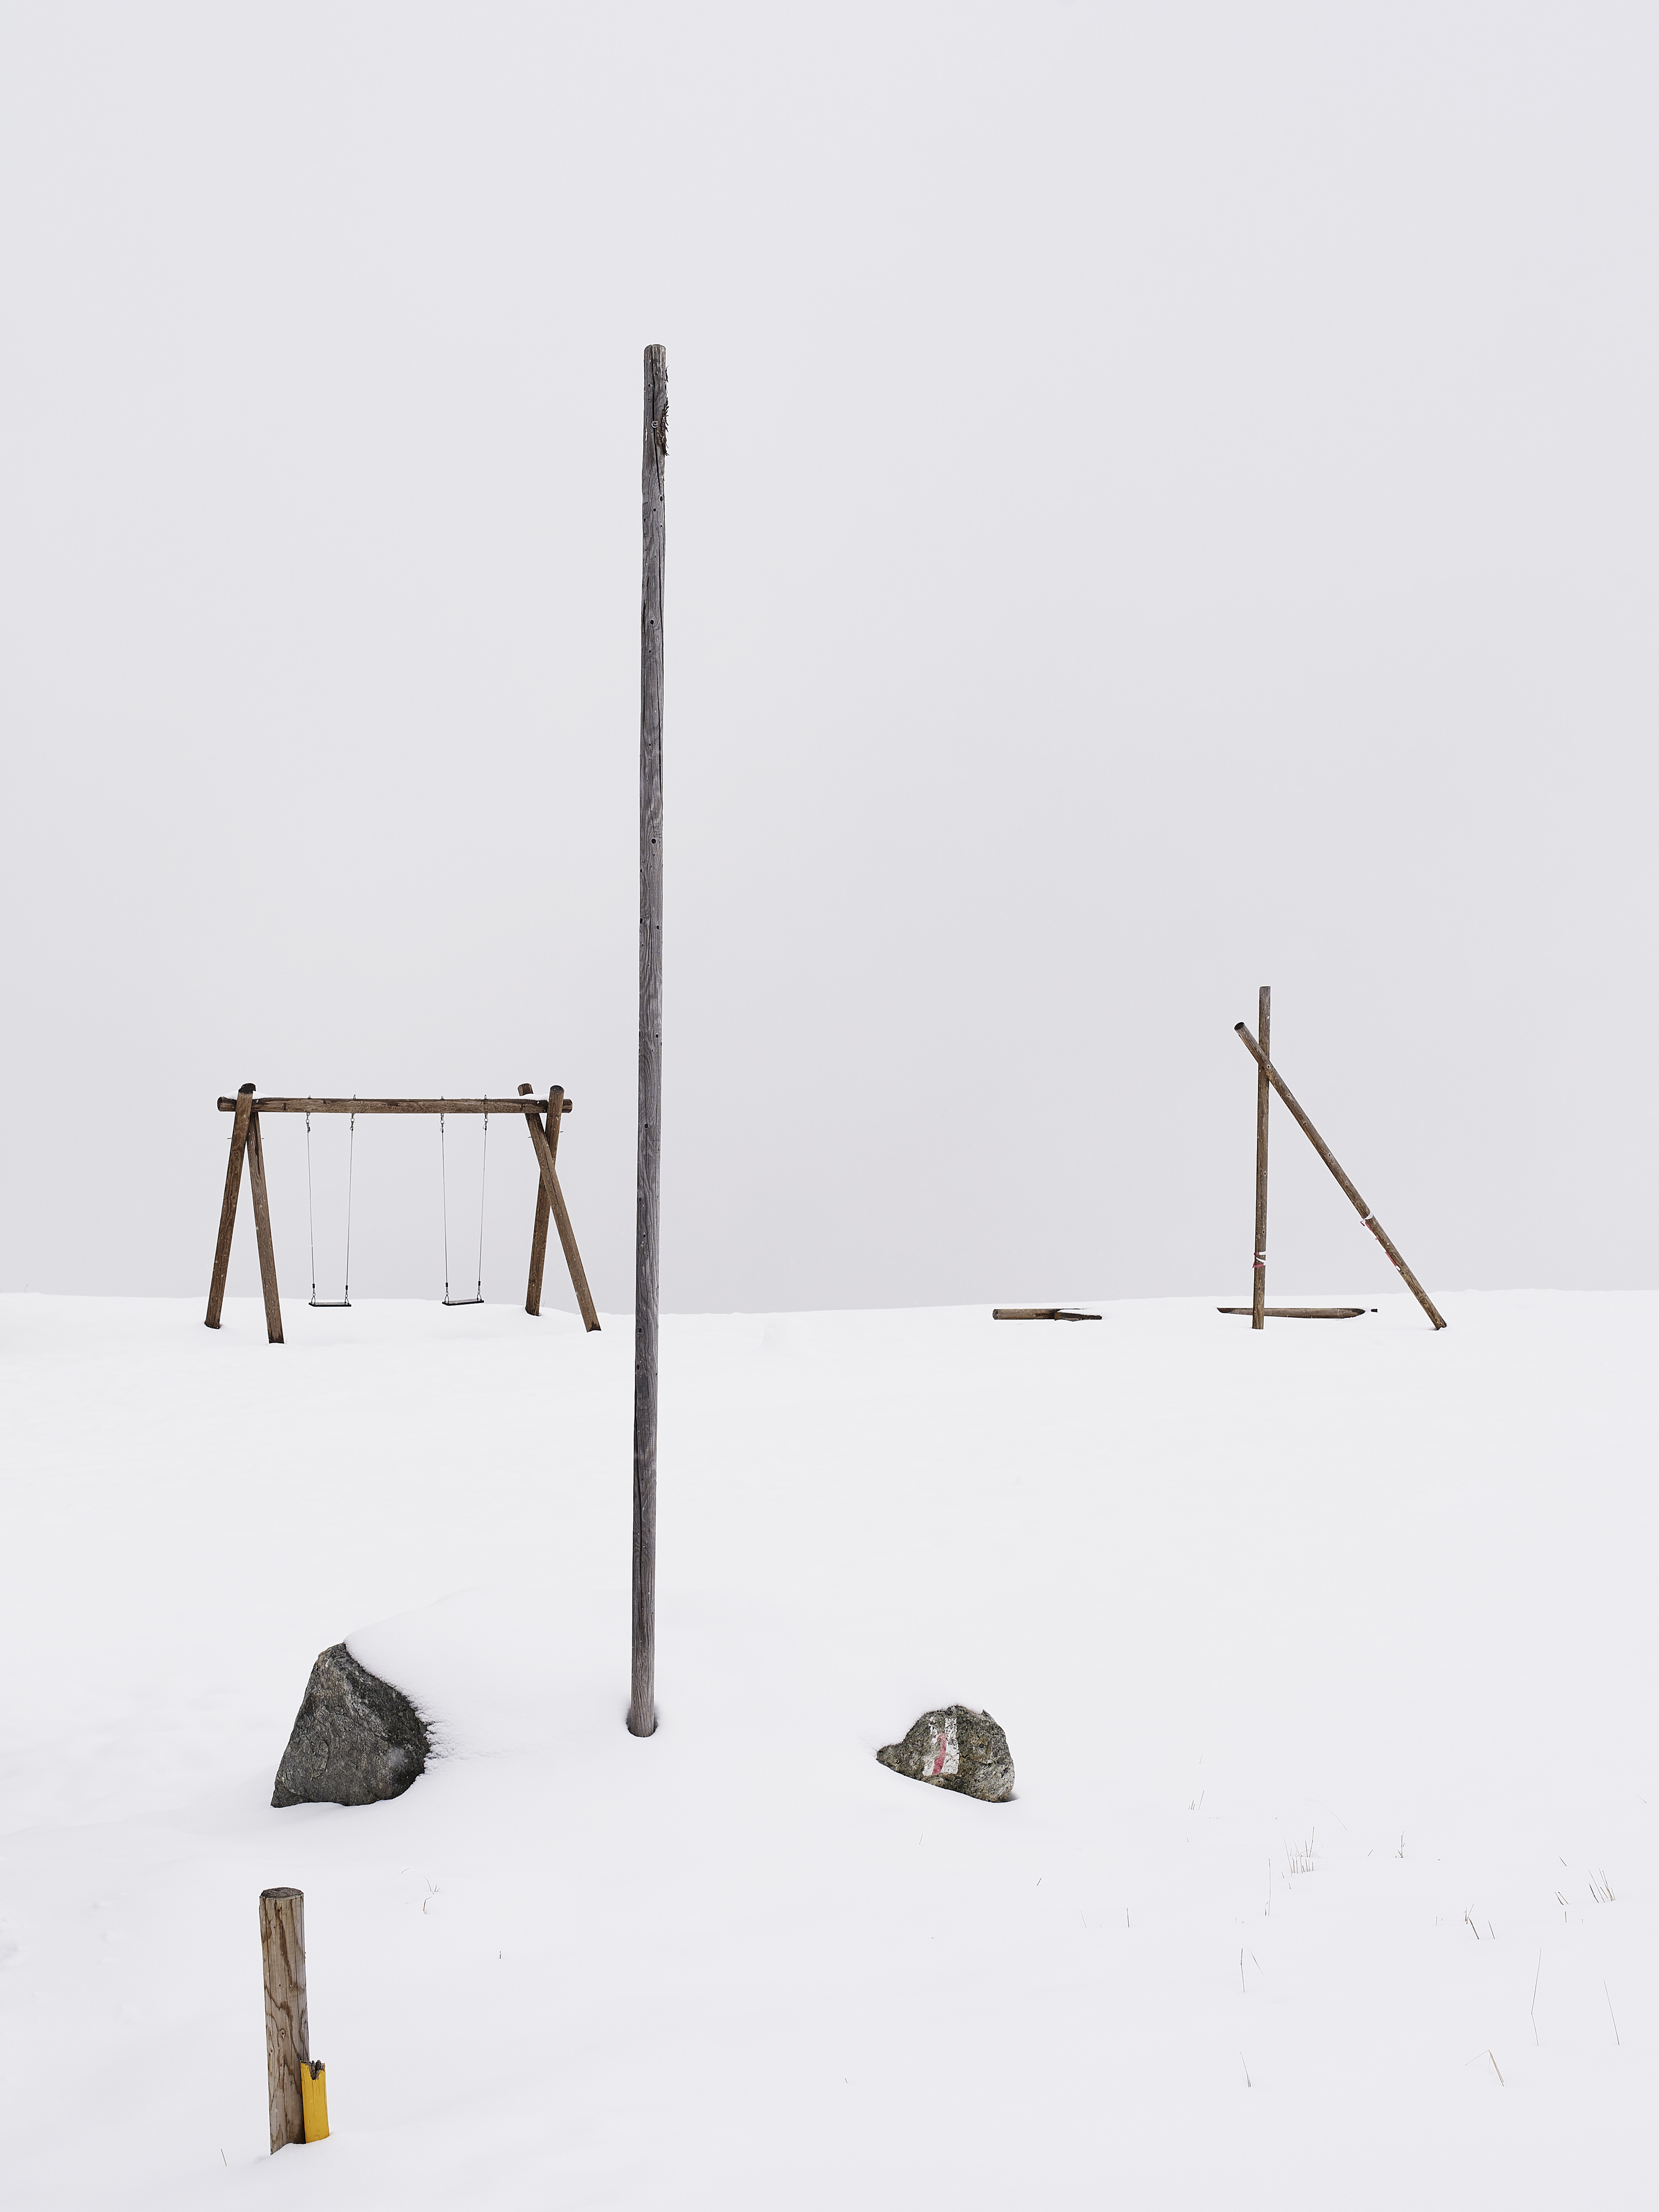 Minimalist photograph of some features of a wooden playground covered by snow in the foggy high Alps.